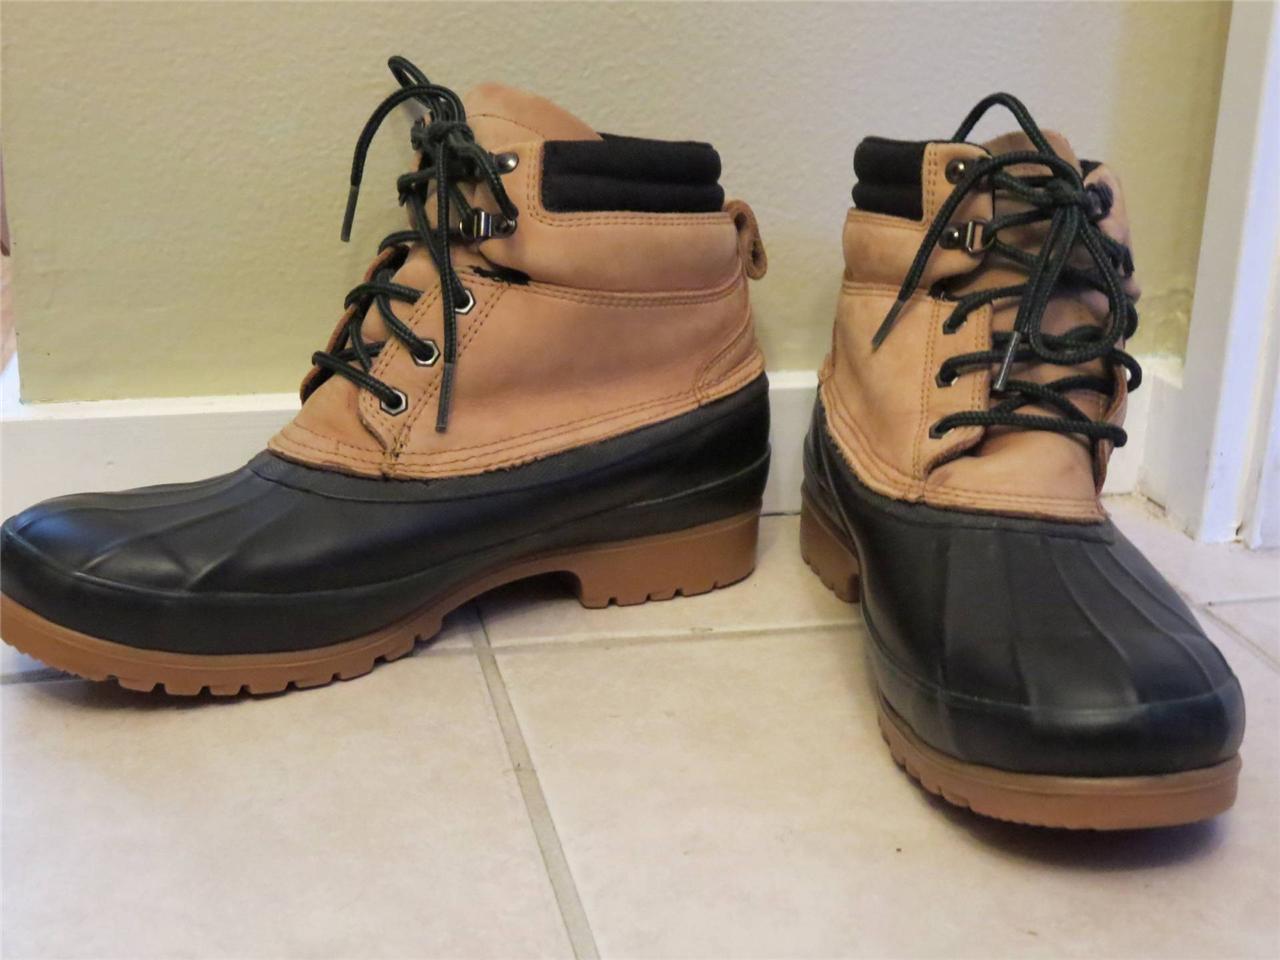 Boot Camp For Adults: Mens Thinsulate Duck Boots